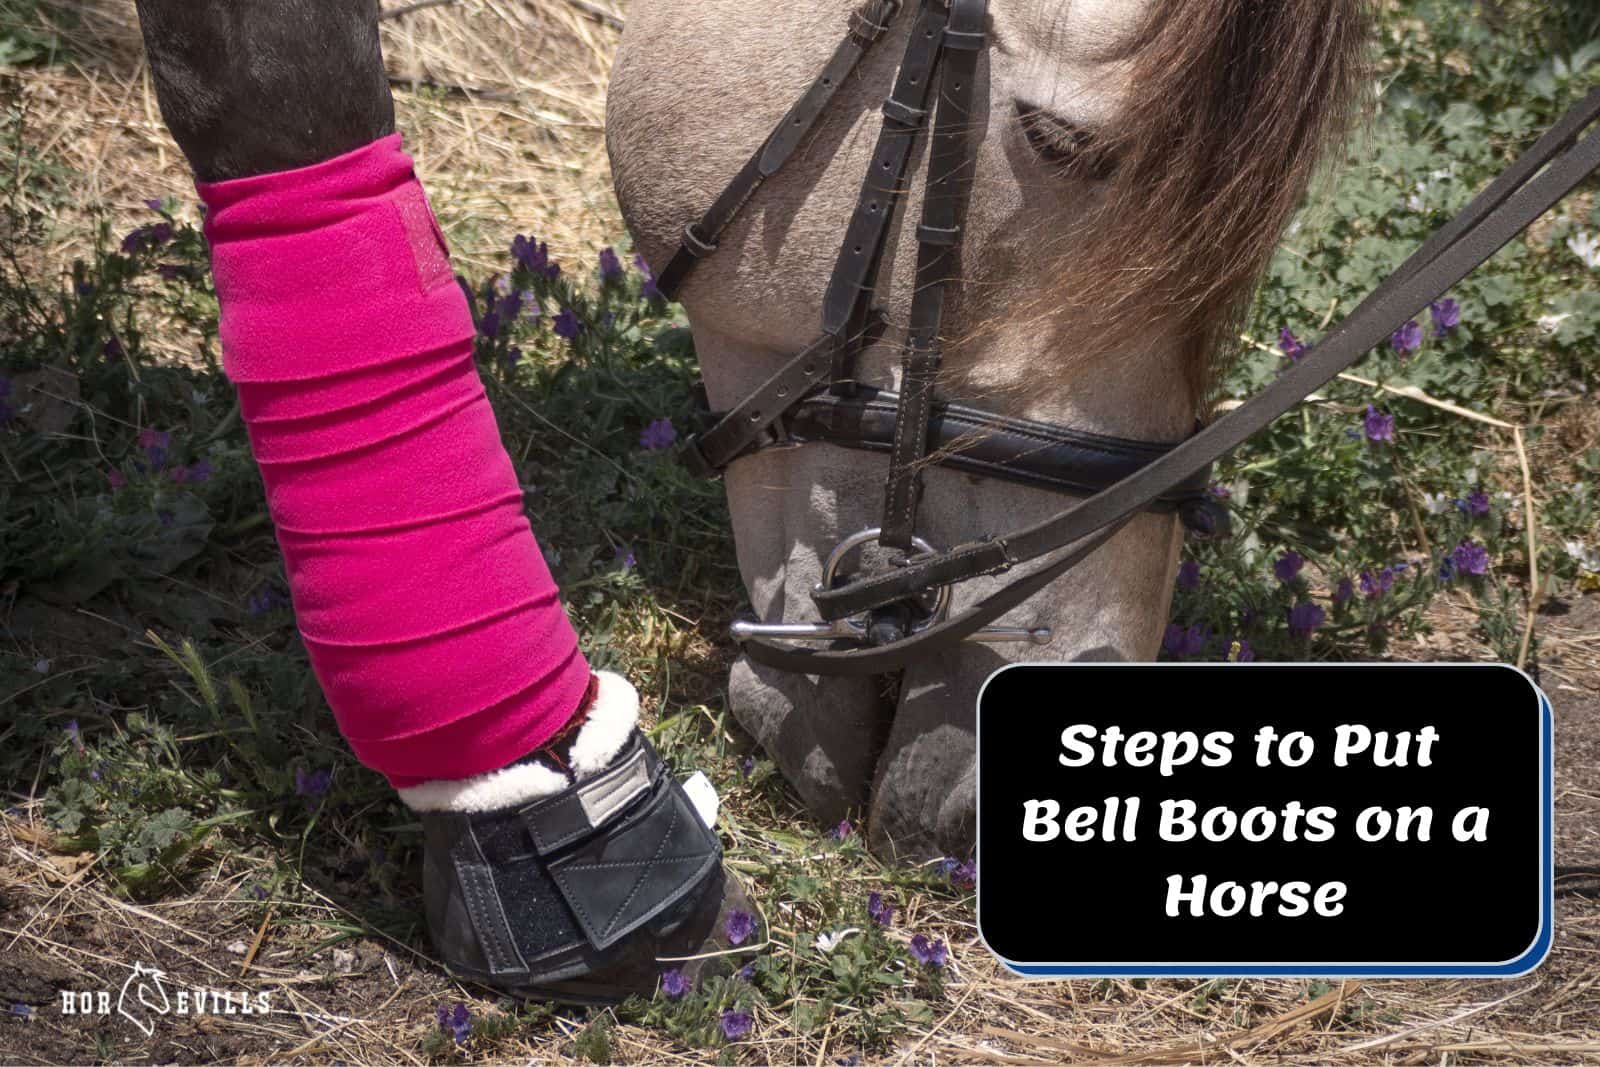 horse wearing velcro bell boots but how to put bell boots on a horse?